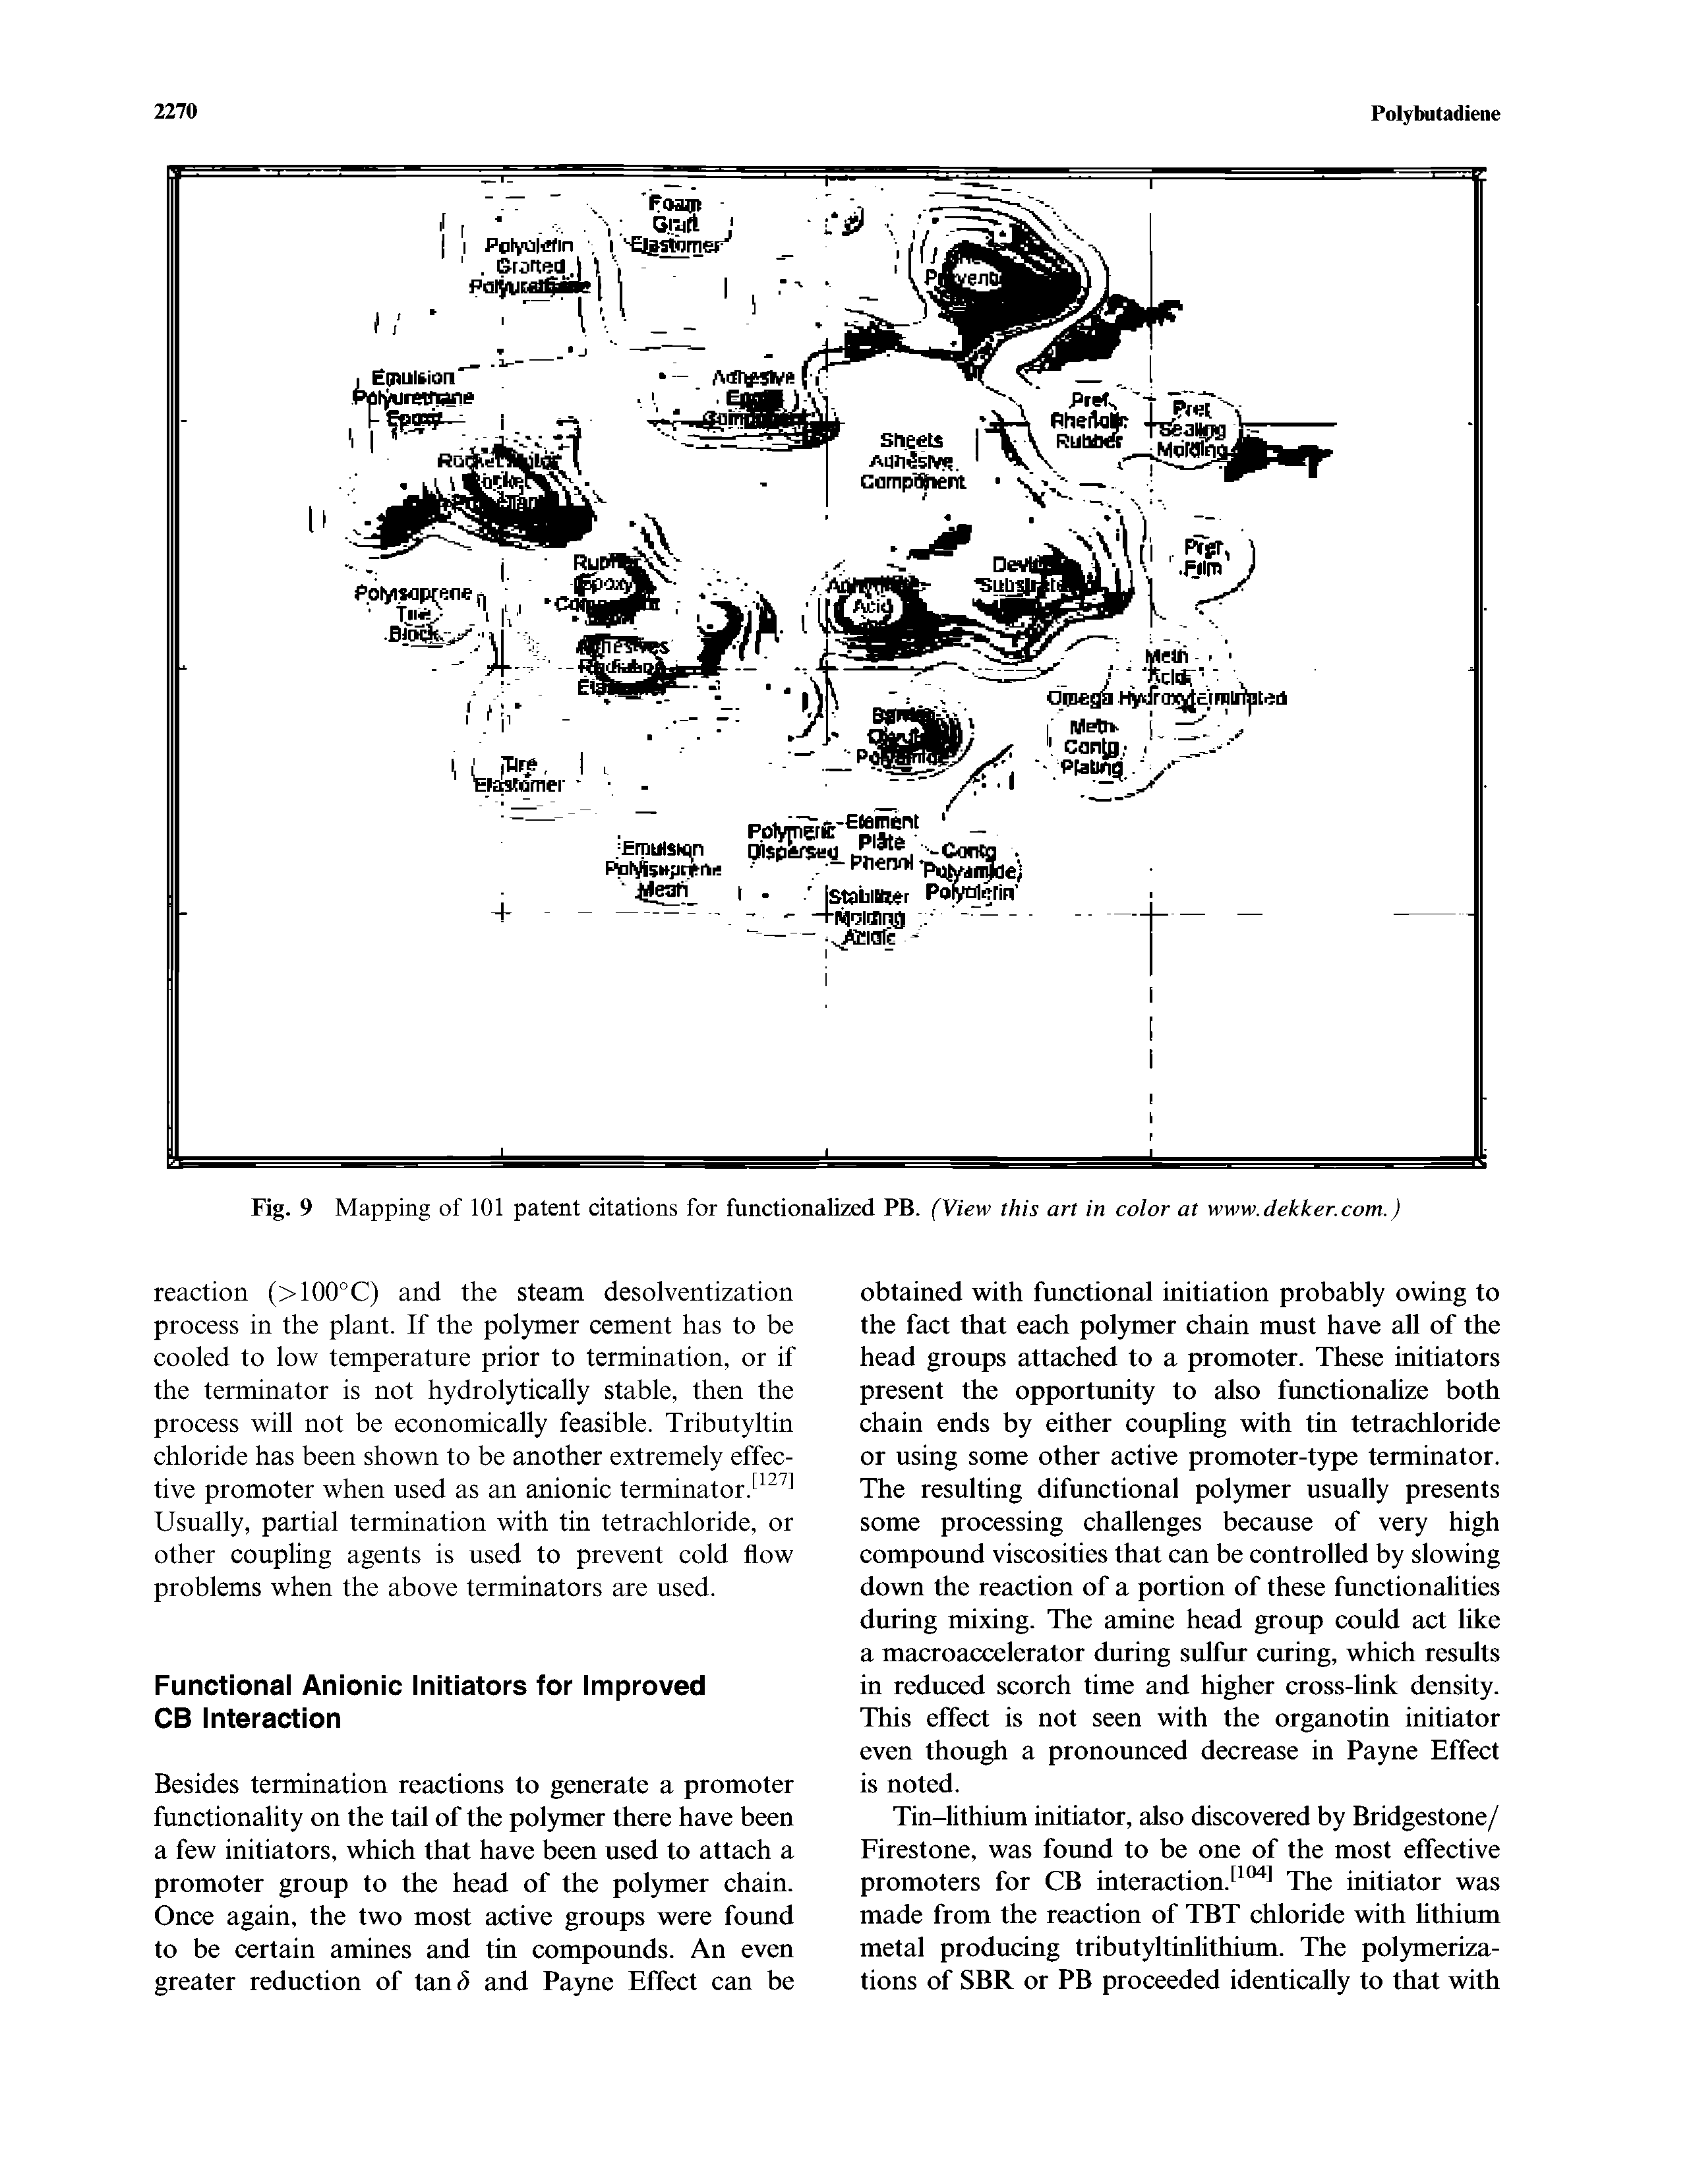 Fig. 9 Mapping of 101 patent citations for functionalized PB. (View this art in color at www.dekker.com.)...